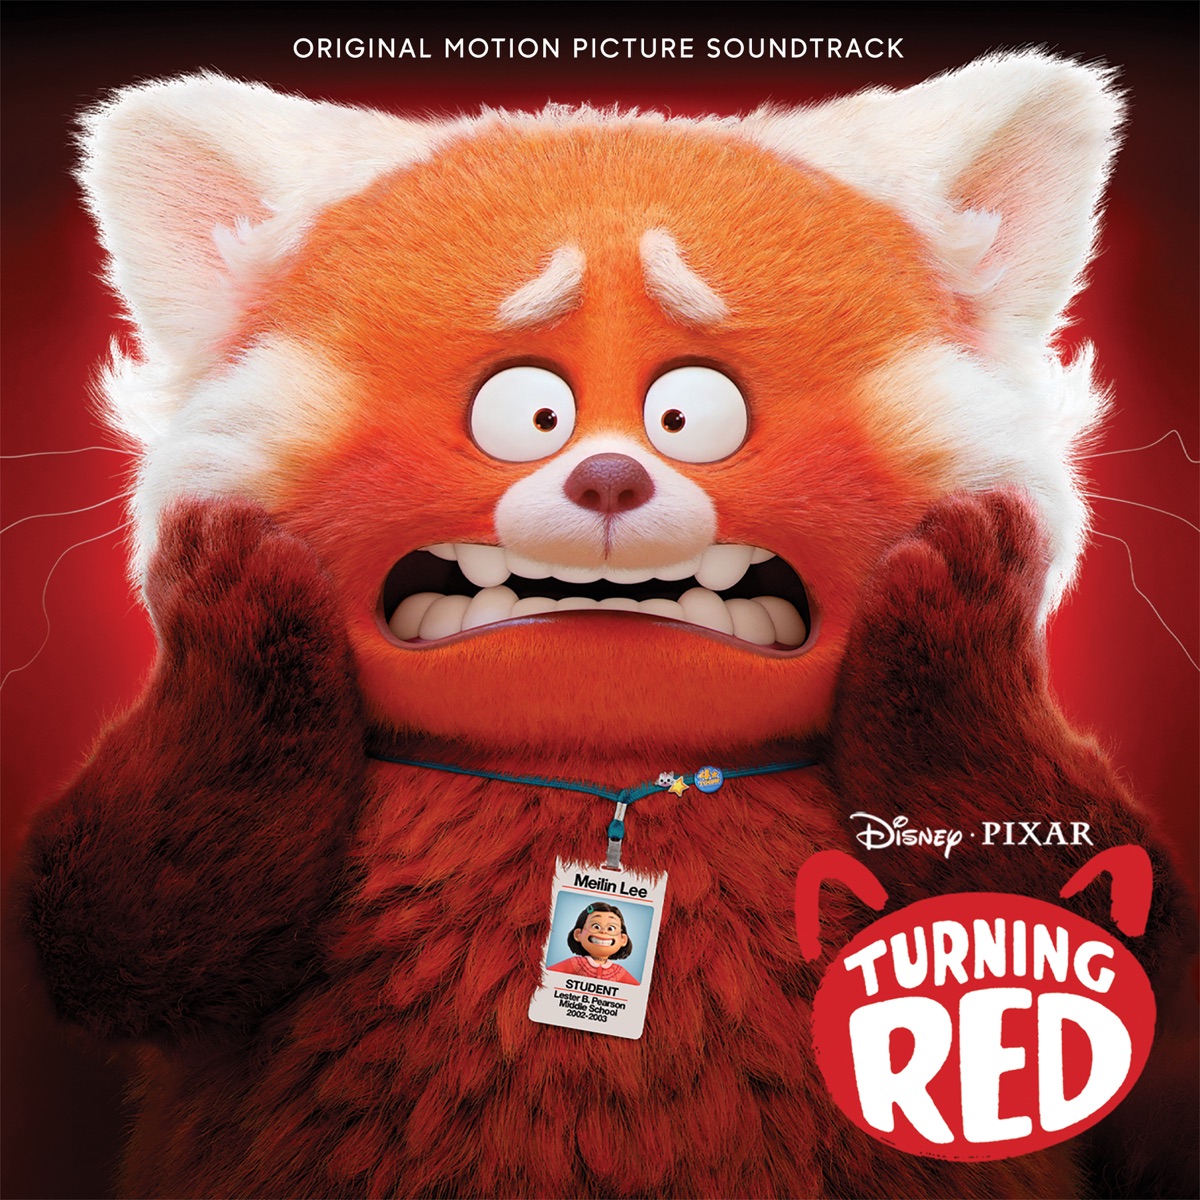 『4☆Town - U Know What's Up』収録の『Turning Red (Original Motion Picture Soundtrack)』ジャケット